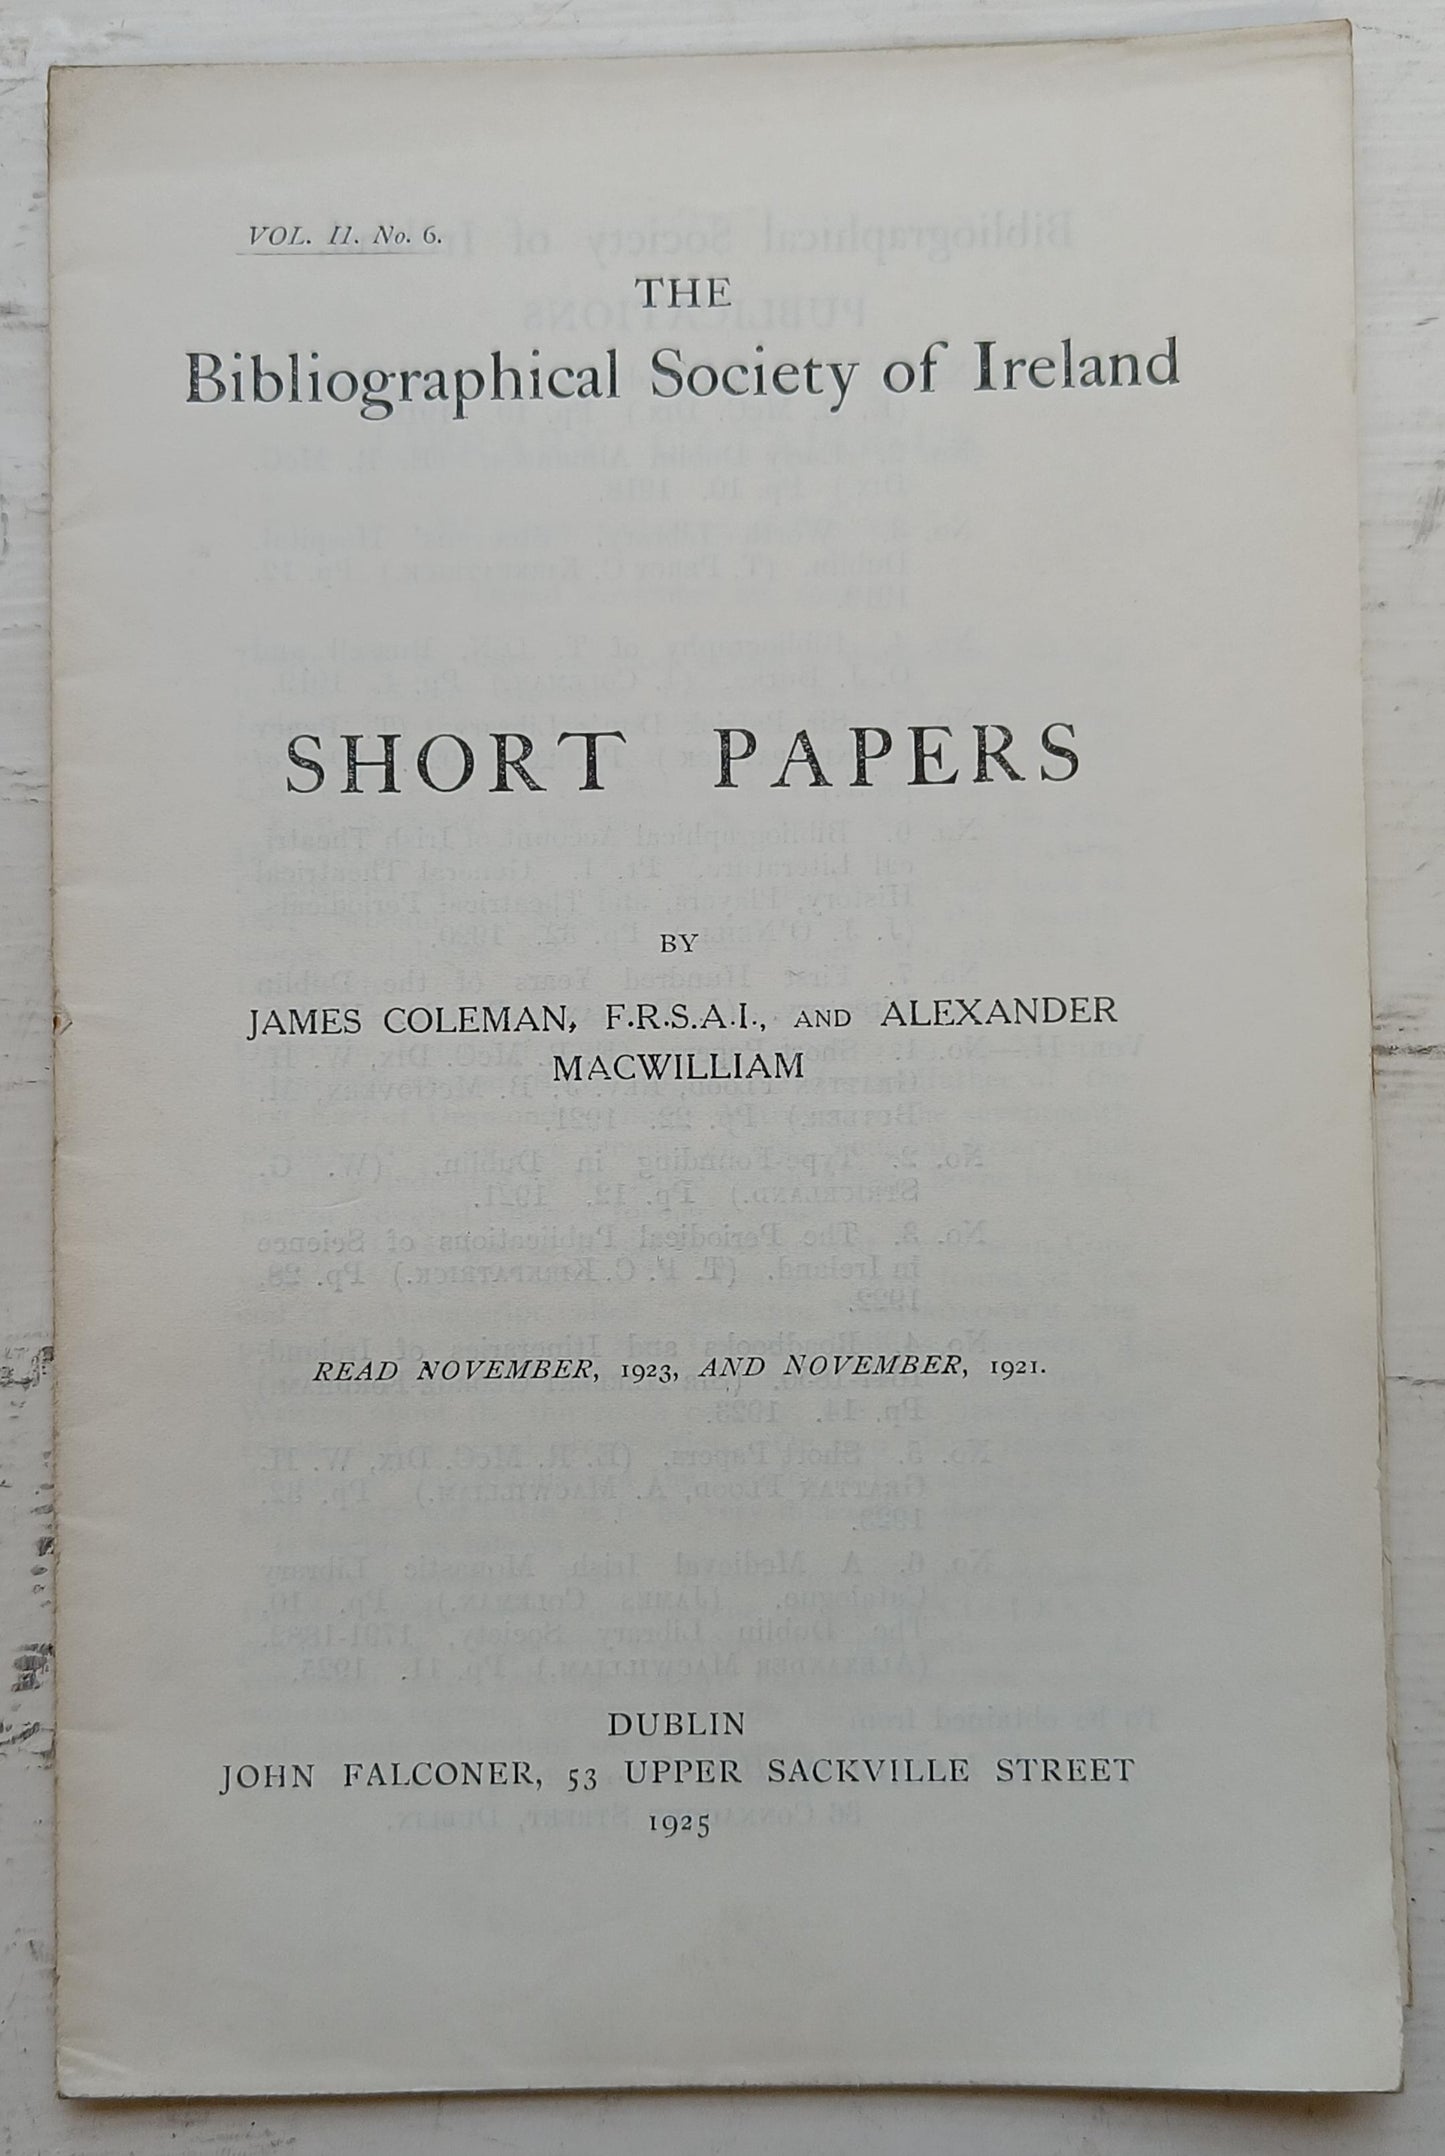 PAMPHLET BUNDLE: Various publications by the Bibliographical Society of Ireland